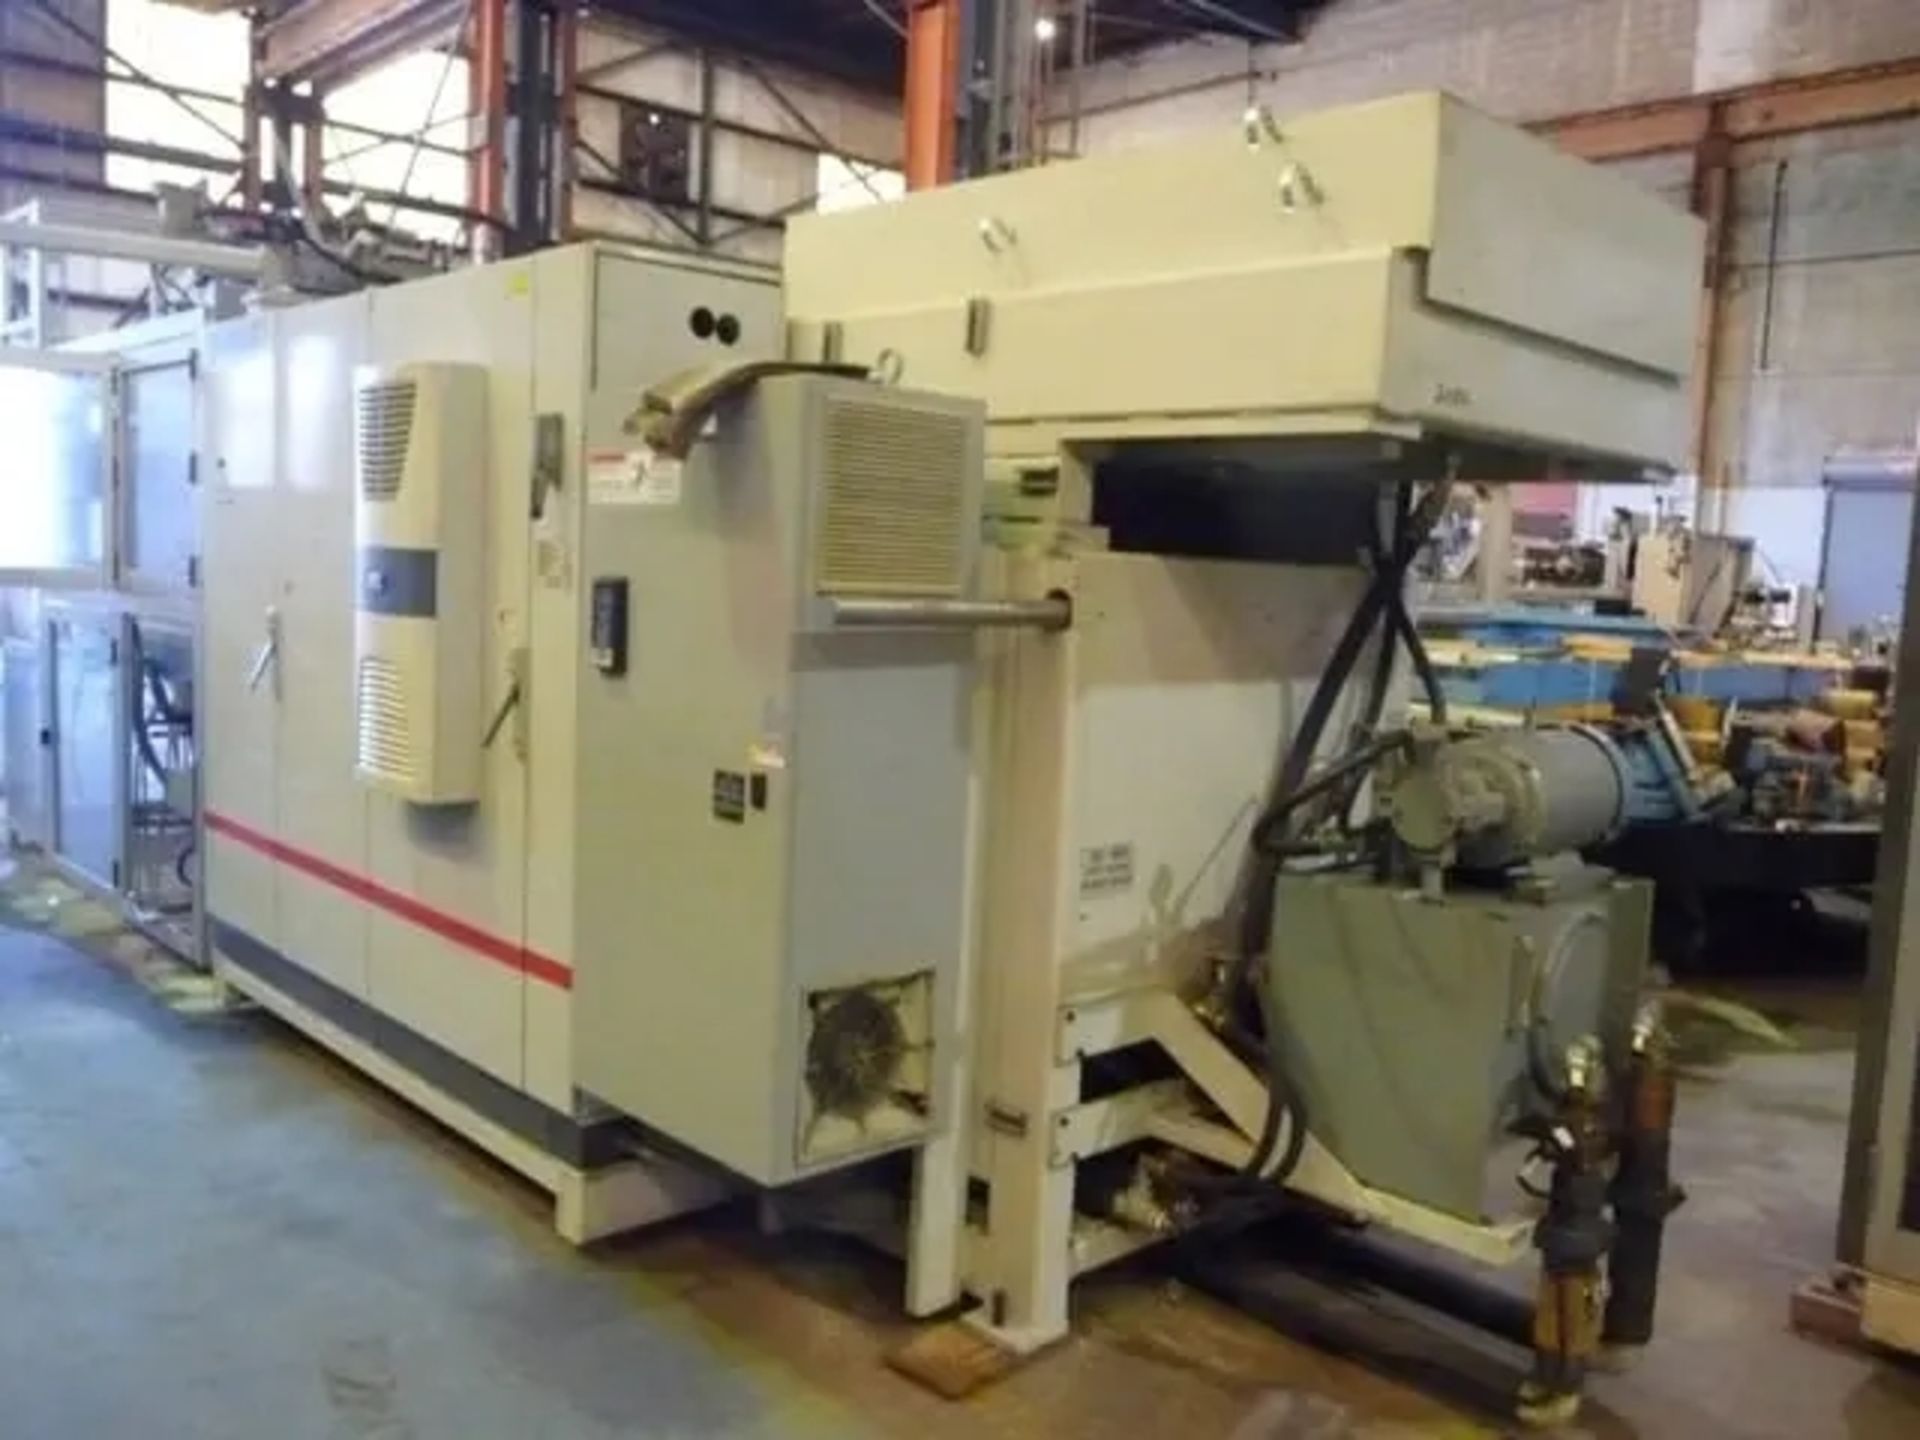 2005 Uniloy R2000, Blow Molder with (2) Heads - Image 12 of 18